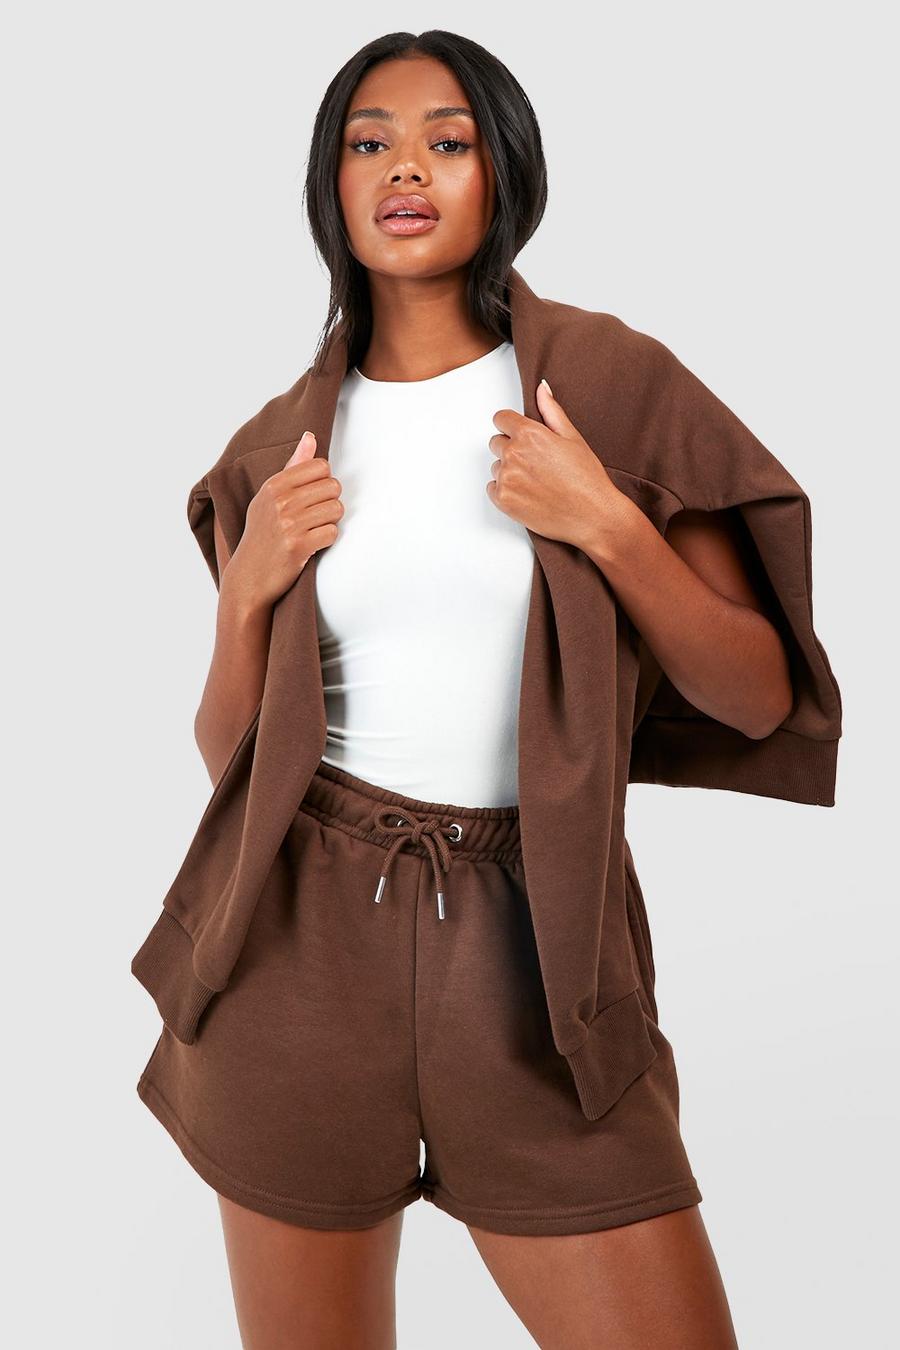 Sweat Short with REEL Cotton: Chocolate